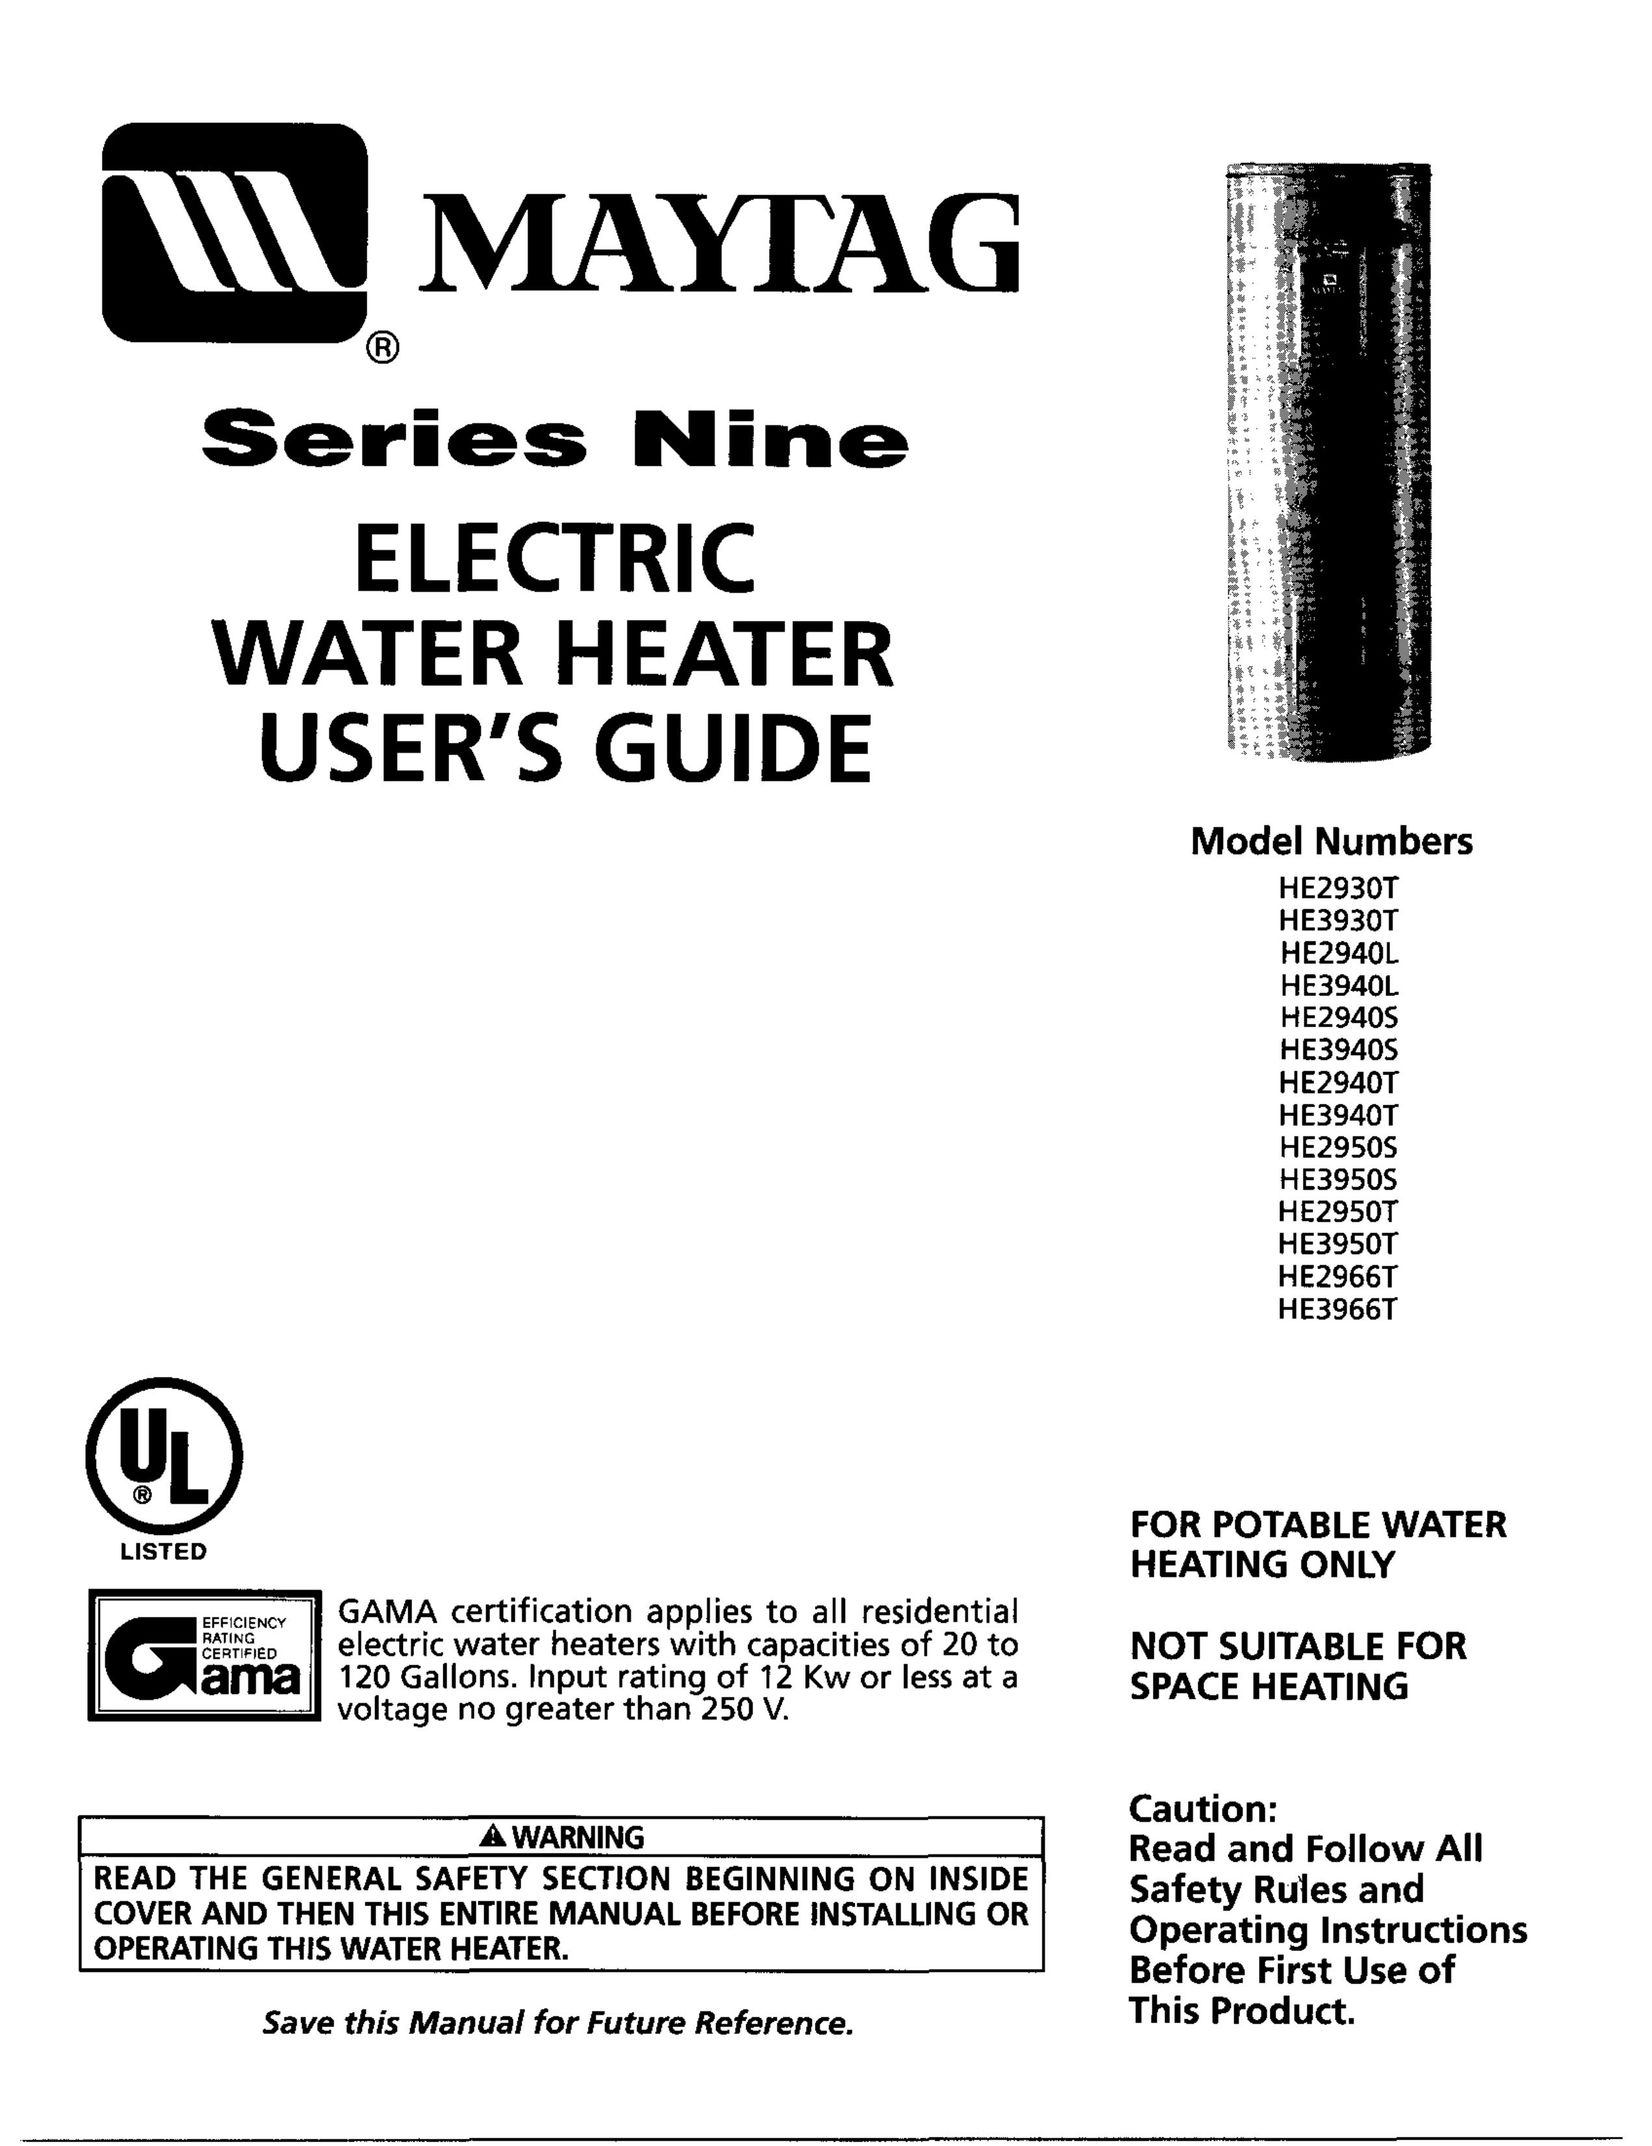 Maytag HE2940S Water Heater User Manual